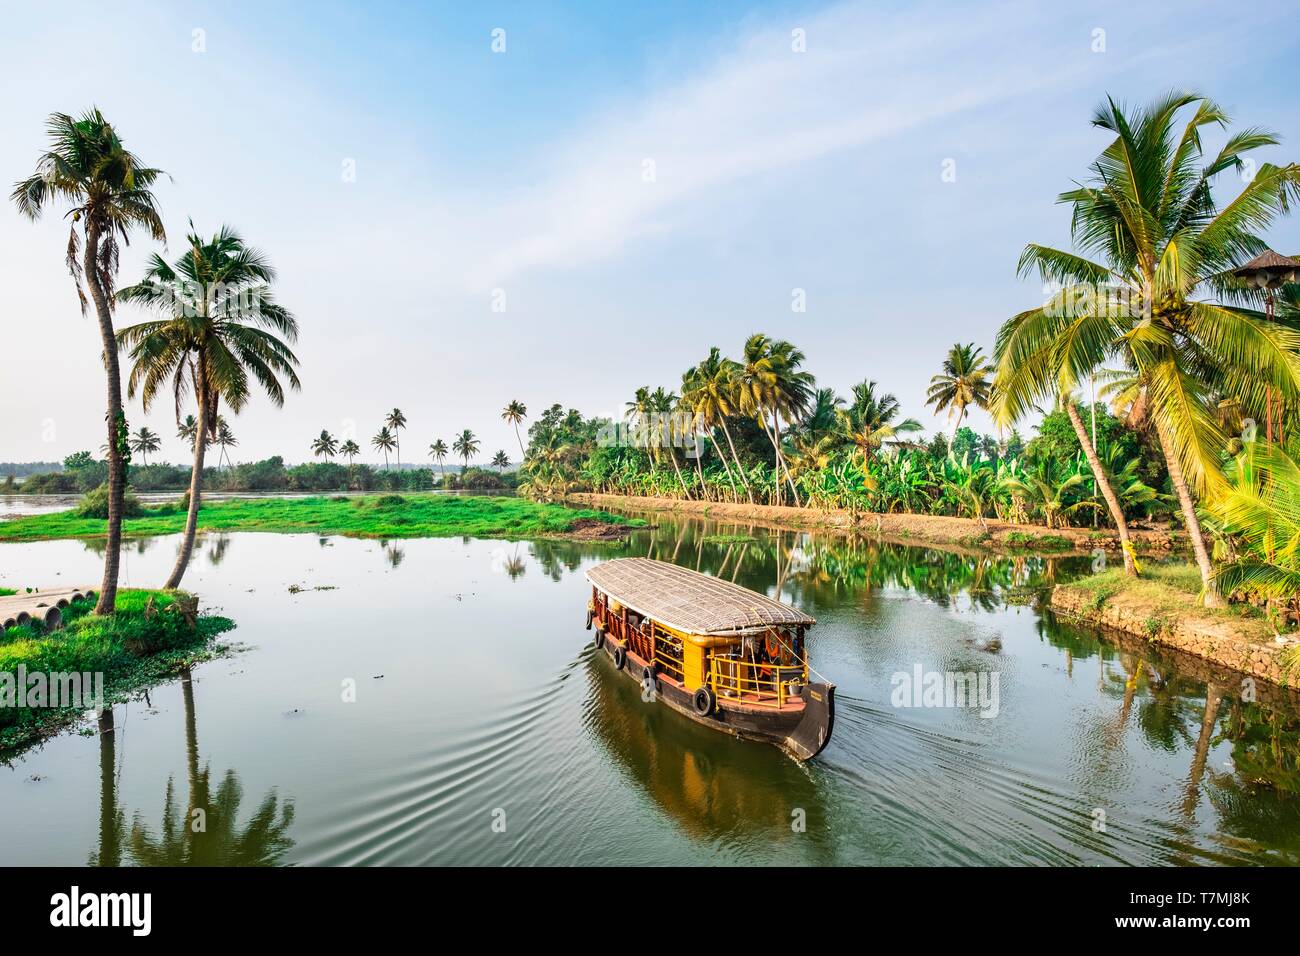 India, state of Kerala, Kumarakom, village set in the backdrop of the Vembanad Lake, backwaters (lagoons and channels networks) sightseeing by kettuvallam (traditional boat) Stock Photo